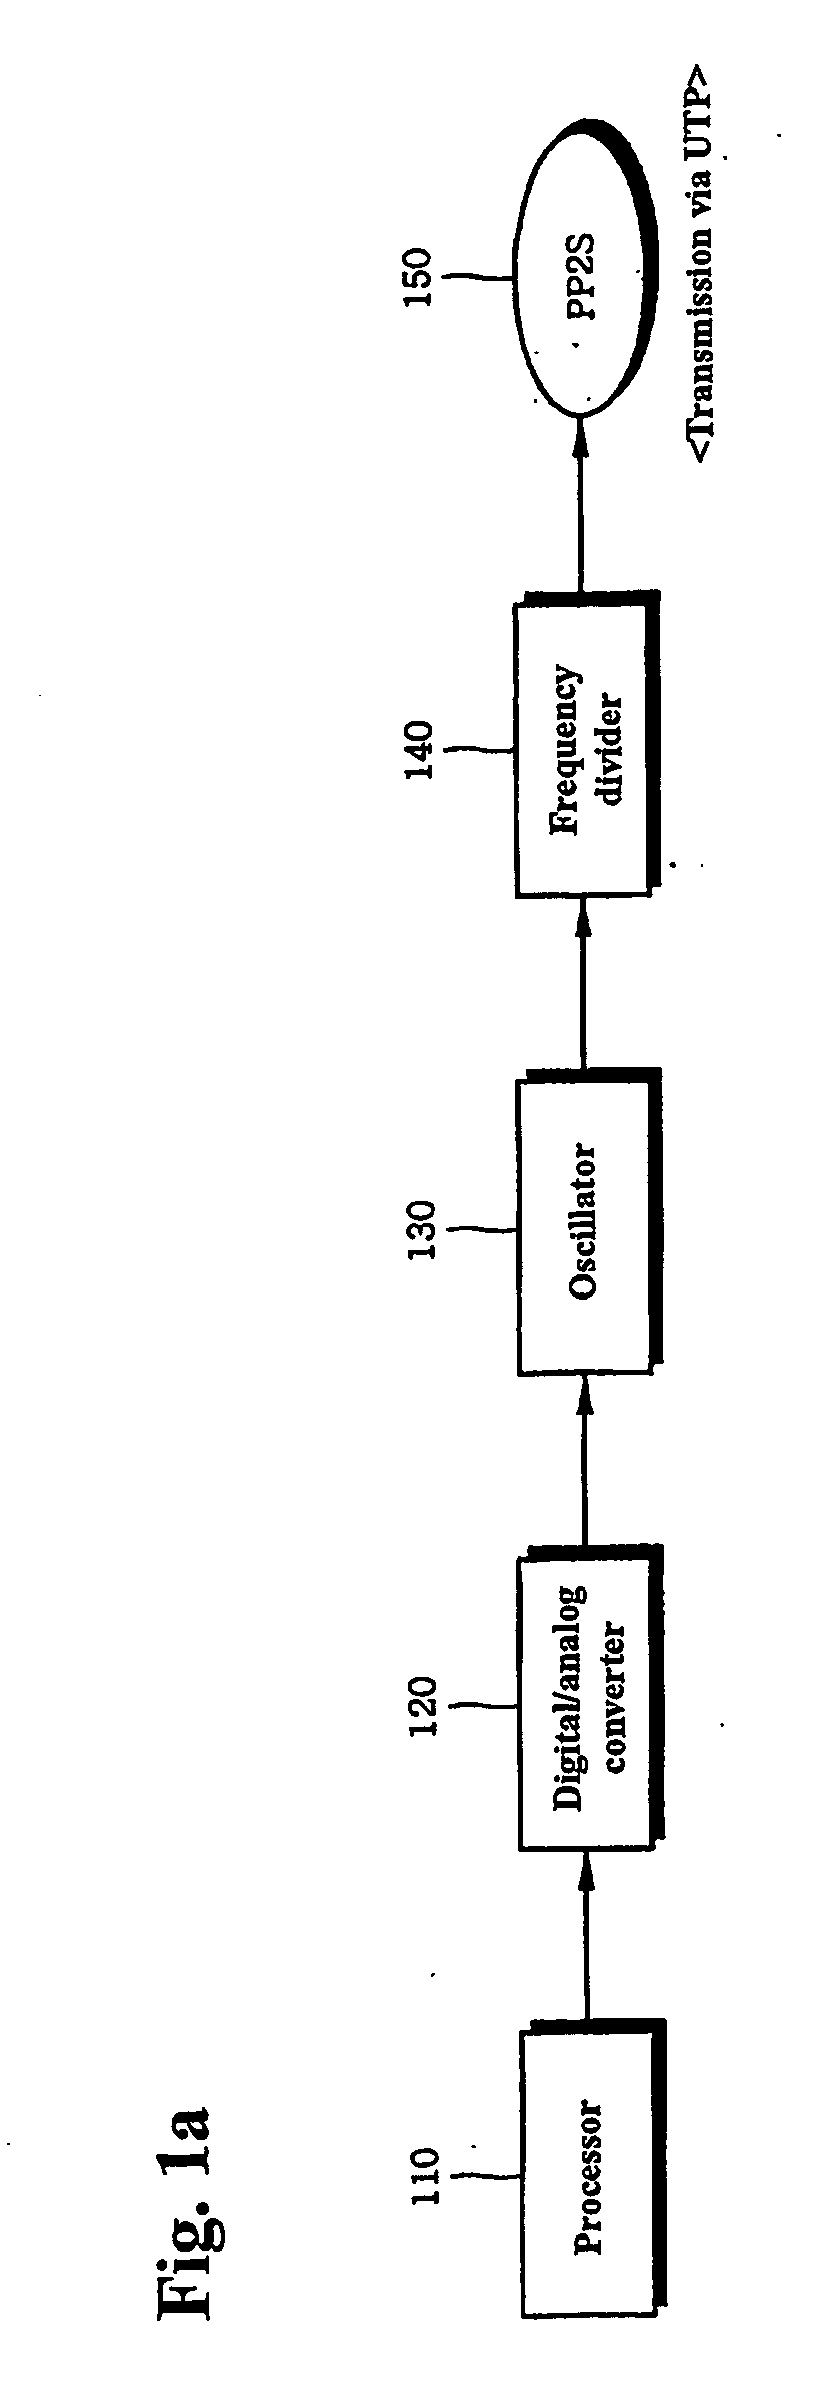 Clock transmission apparatus for network synchronization between systems